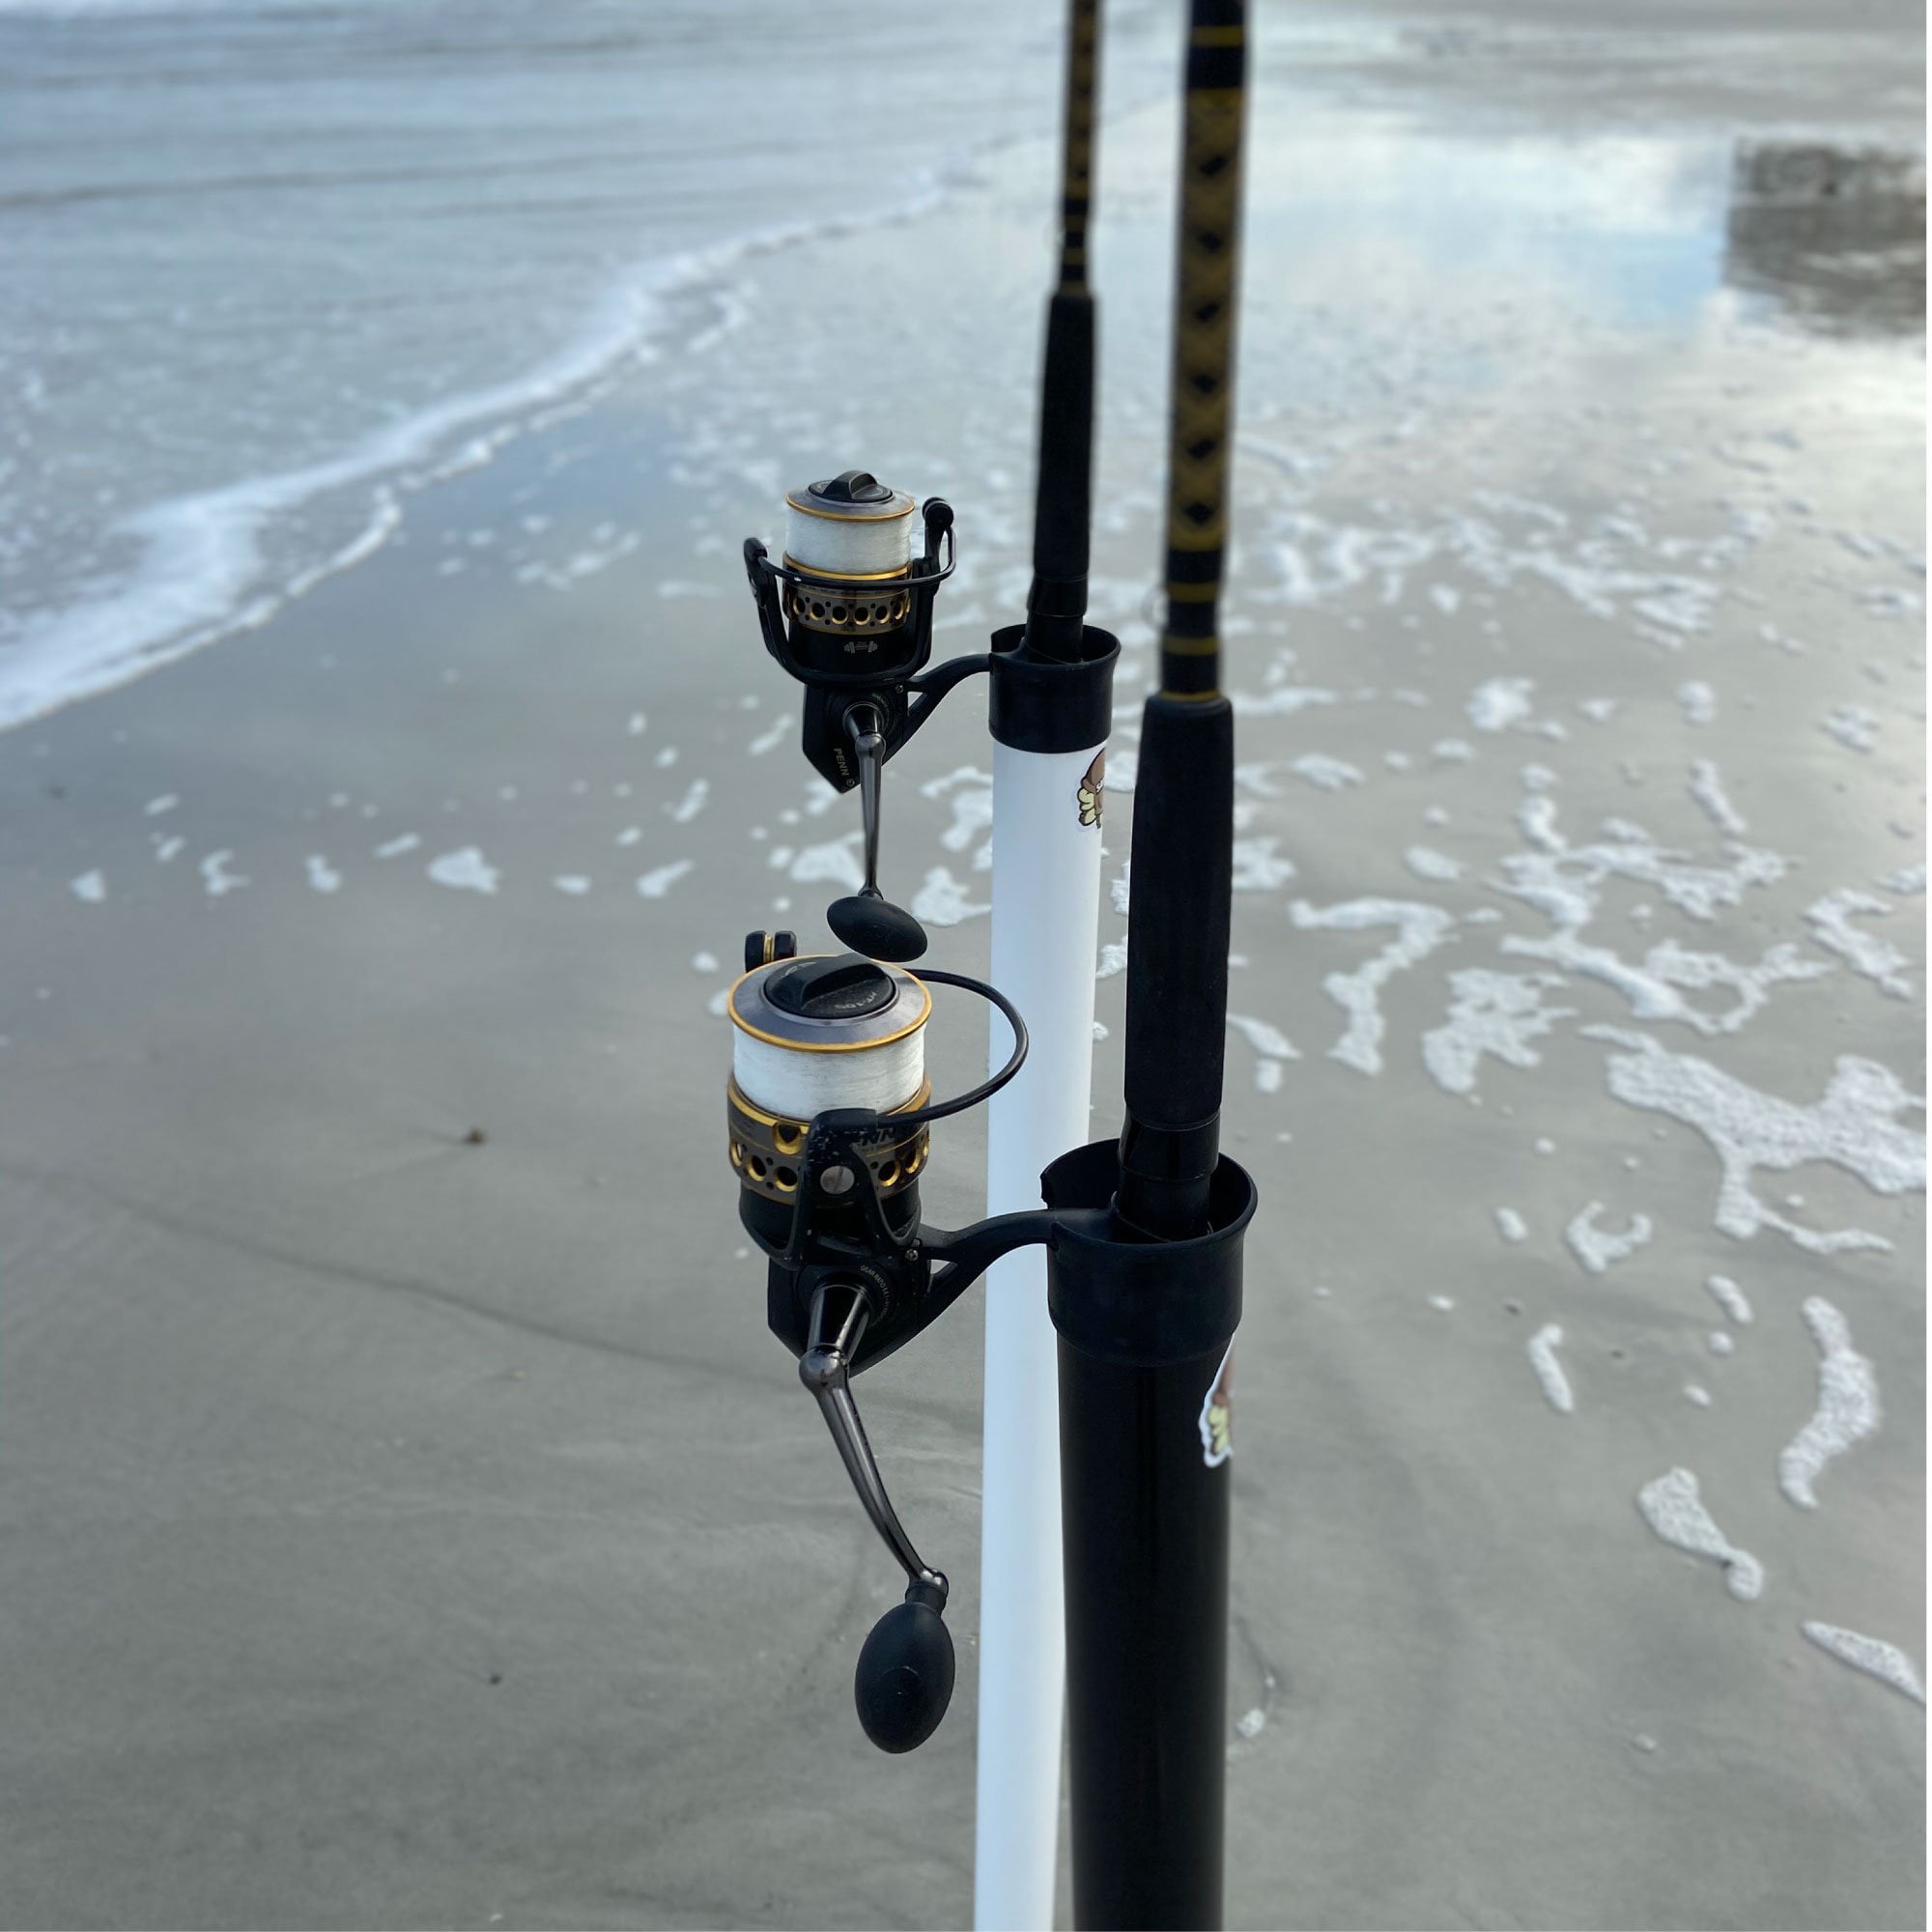 Sand Flea Surf Fishing Rod Holder Beach Sand Spike with Microfiber Bait Towel and Adjustable Surf Rod Pin. 2, 3 or 4 Foot Lengths. Made from